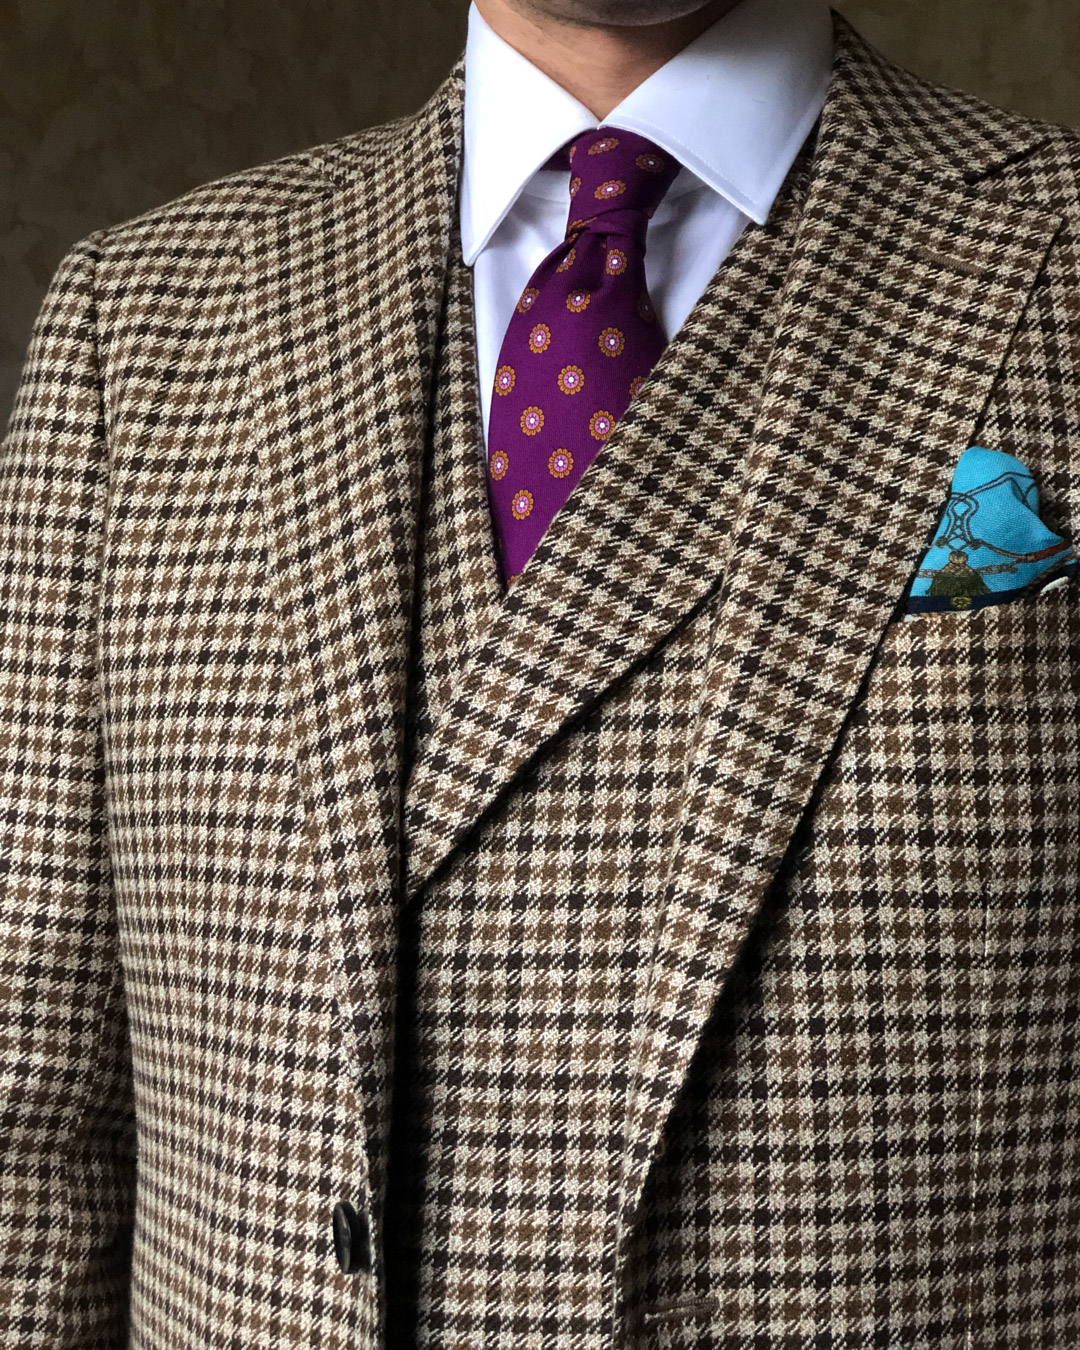 Three-Piece Houndstooth Suit, White Shirt and Purple Floral Tie